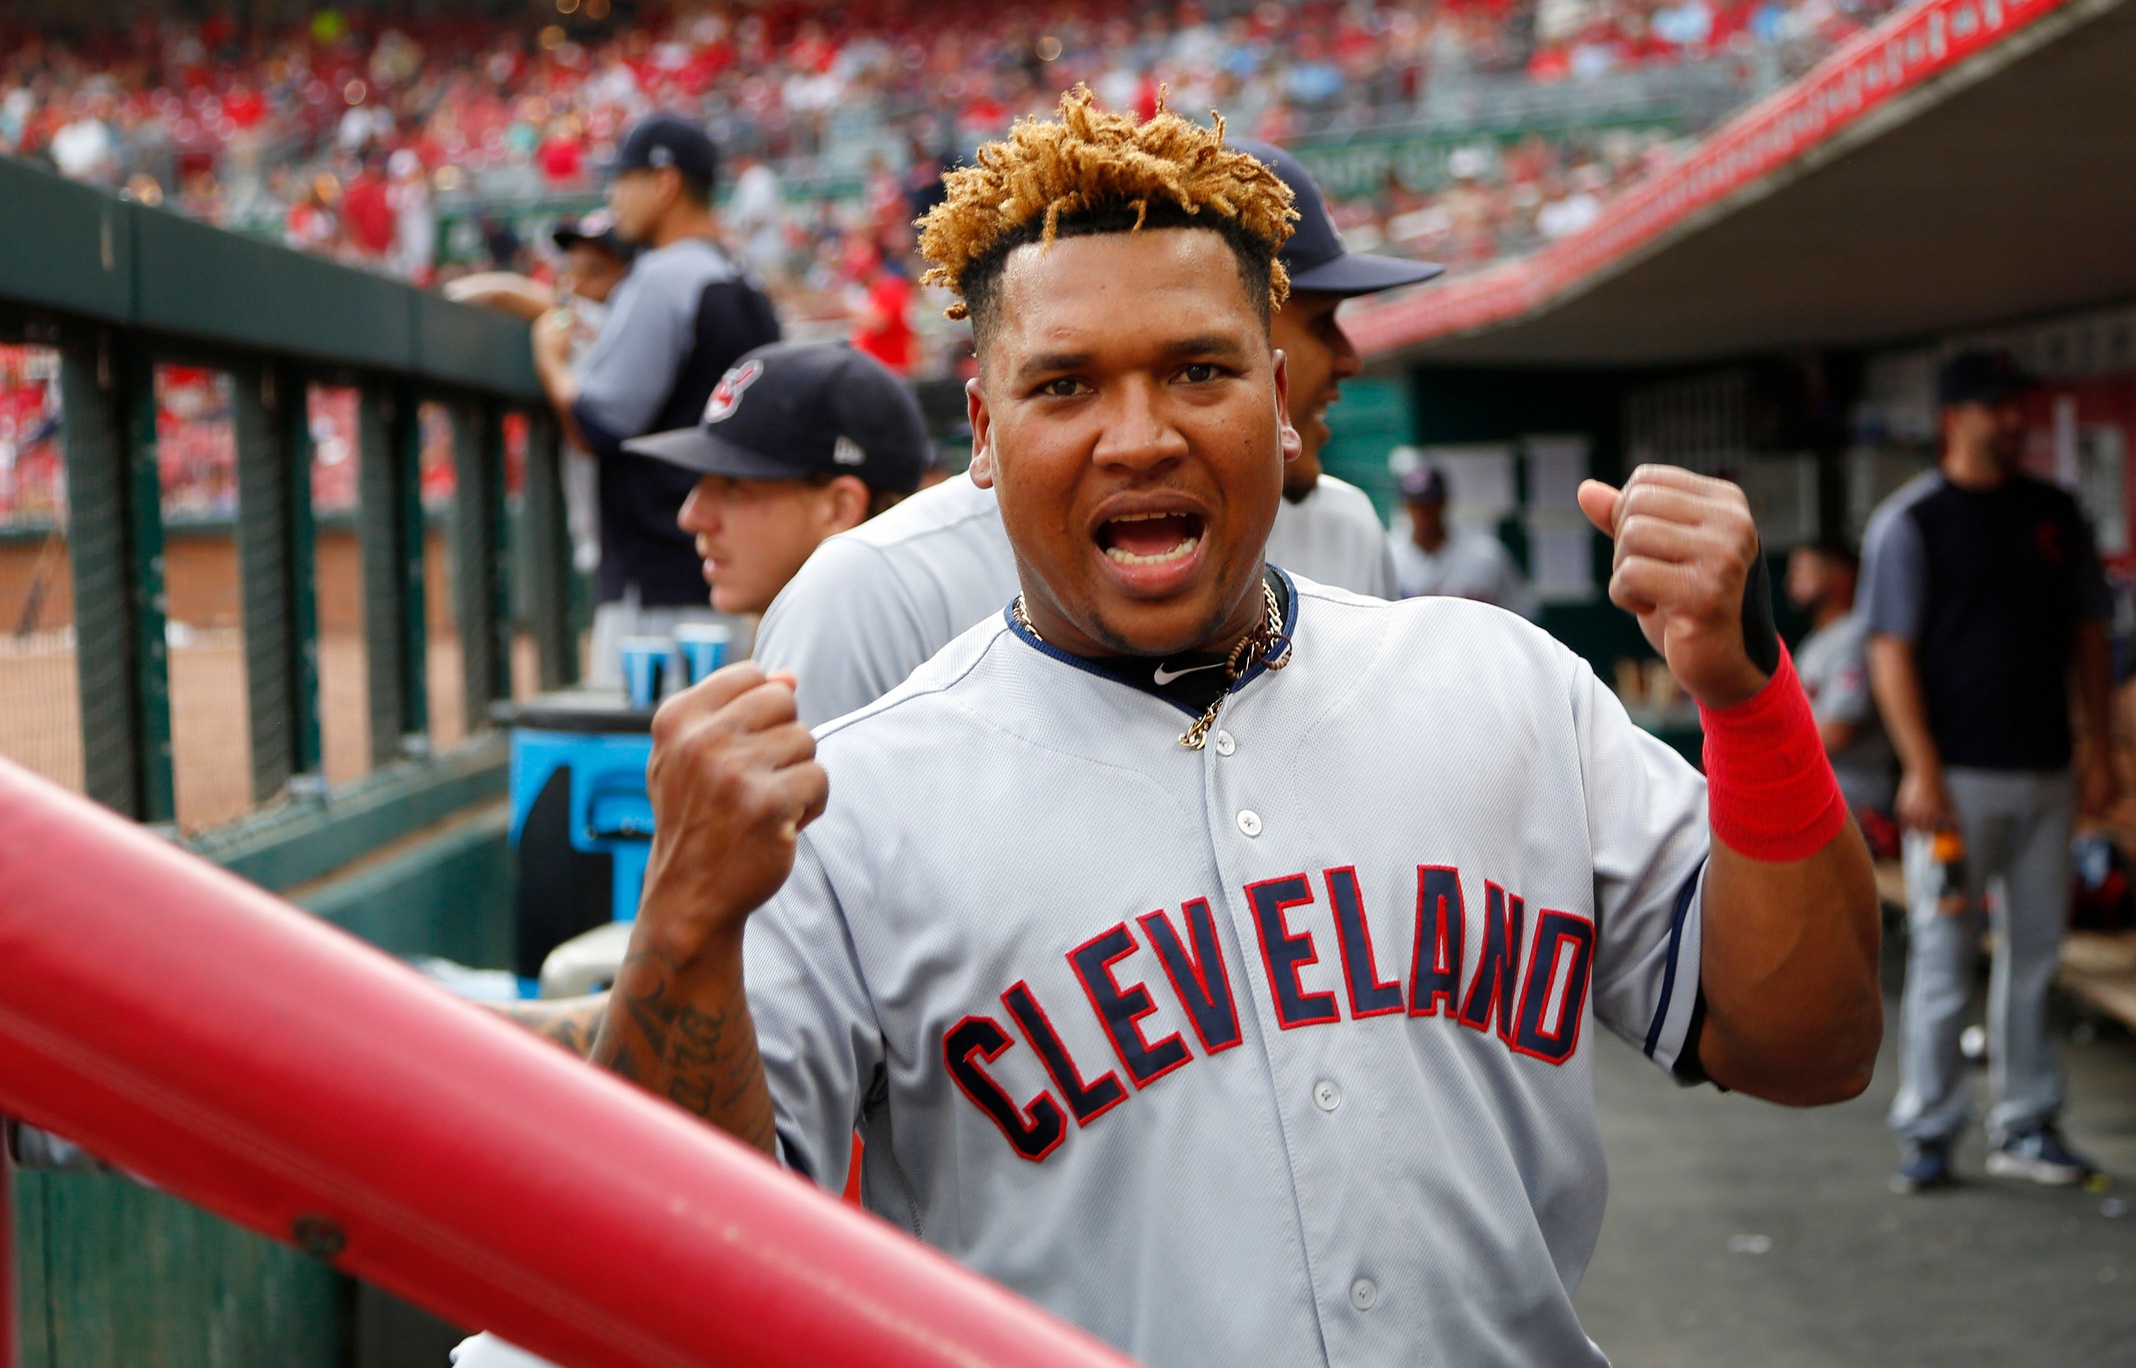 Aug 14, 2018; Cincinnati, OH, USA; Cleveland Indians third baseman Jose Ramirez (11) reacts to the camera before a game against the Cincinnati Reds at Great American Ball Park. Mandatory Credit: David Kohl-USA TODAY Sports